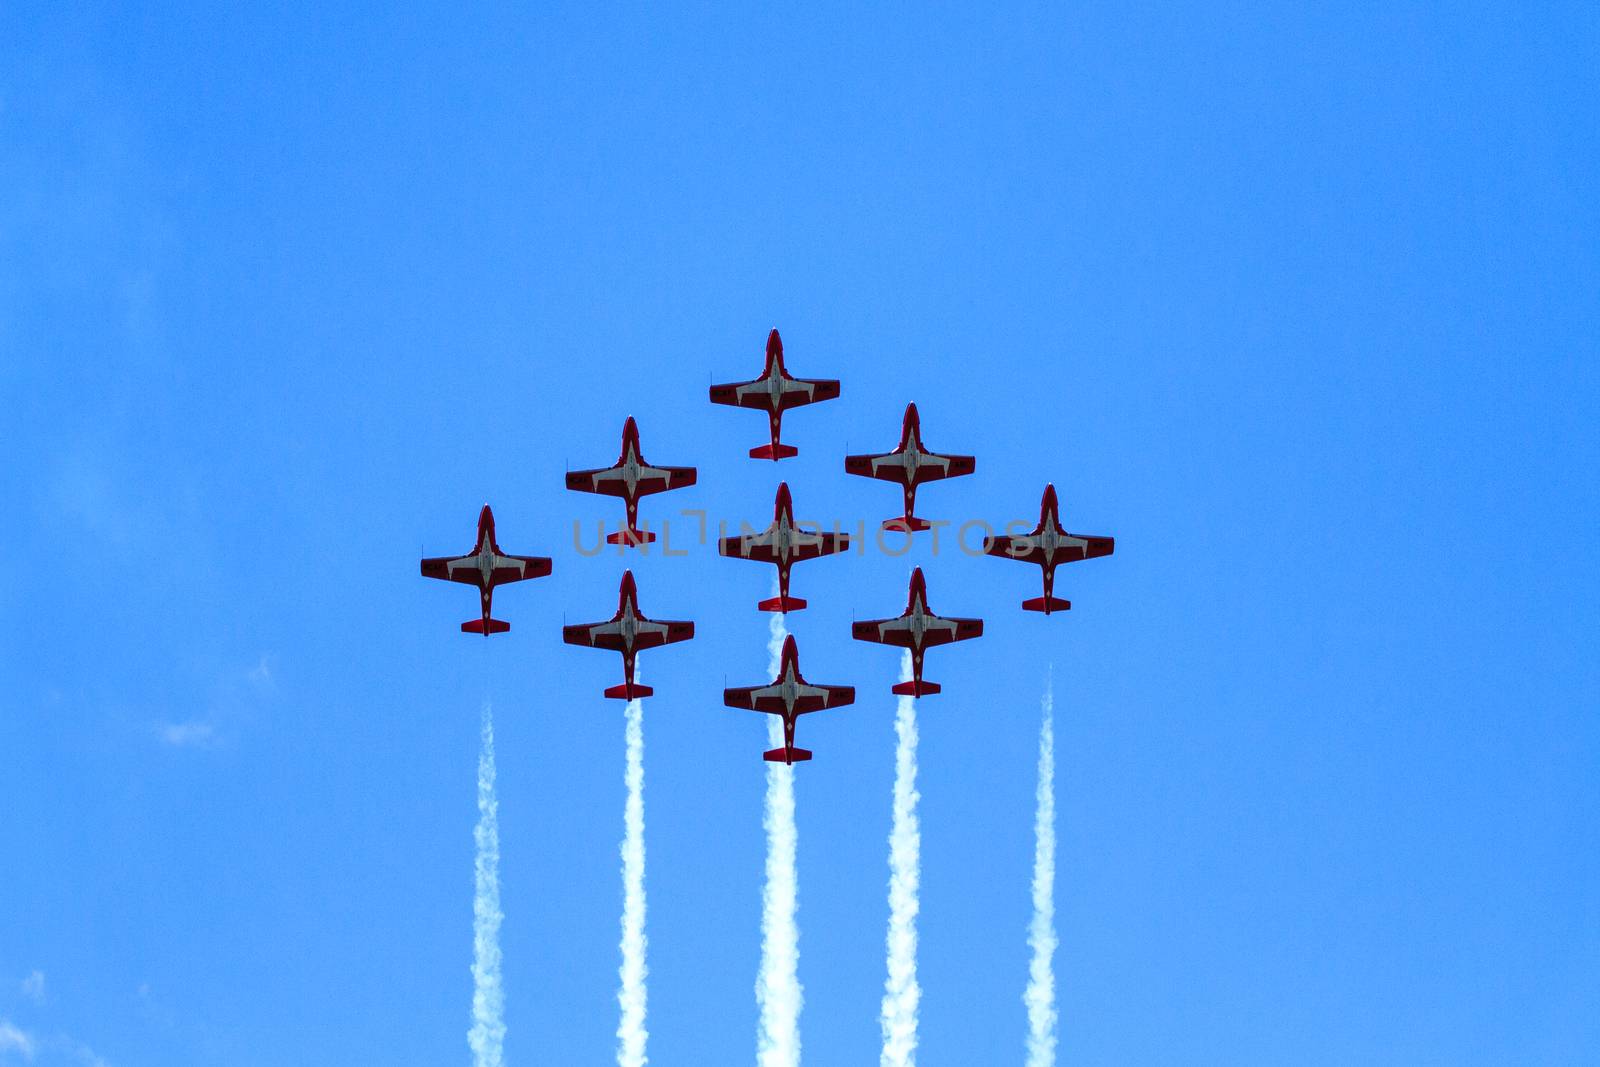 SPRINGBANK CANADA - JUL 20, 2015: The Snowbirds Demonstration Team demonstrate the skill, professionalism, and teamwork of Canadian Forces personnel during the Wings Over Lethbridge.